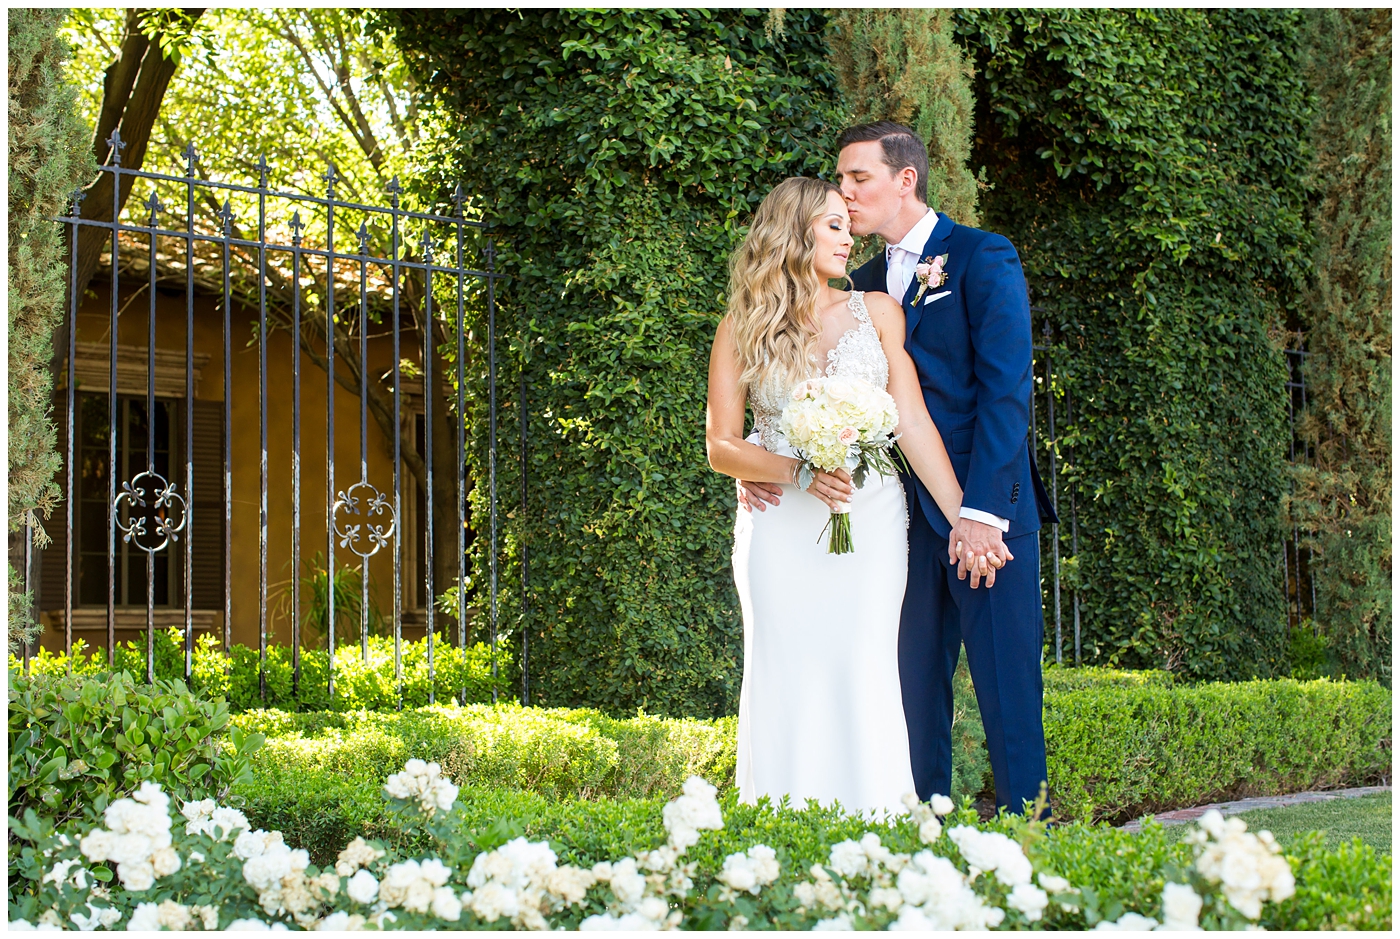 bride in lillian lottie couture strapped beaded wedding dress with organic blush, white and greenery bouquet with groom in blue suit with rose boutonniere wedding day portrait 